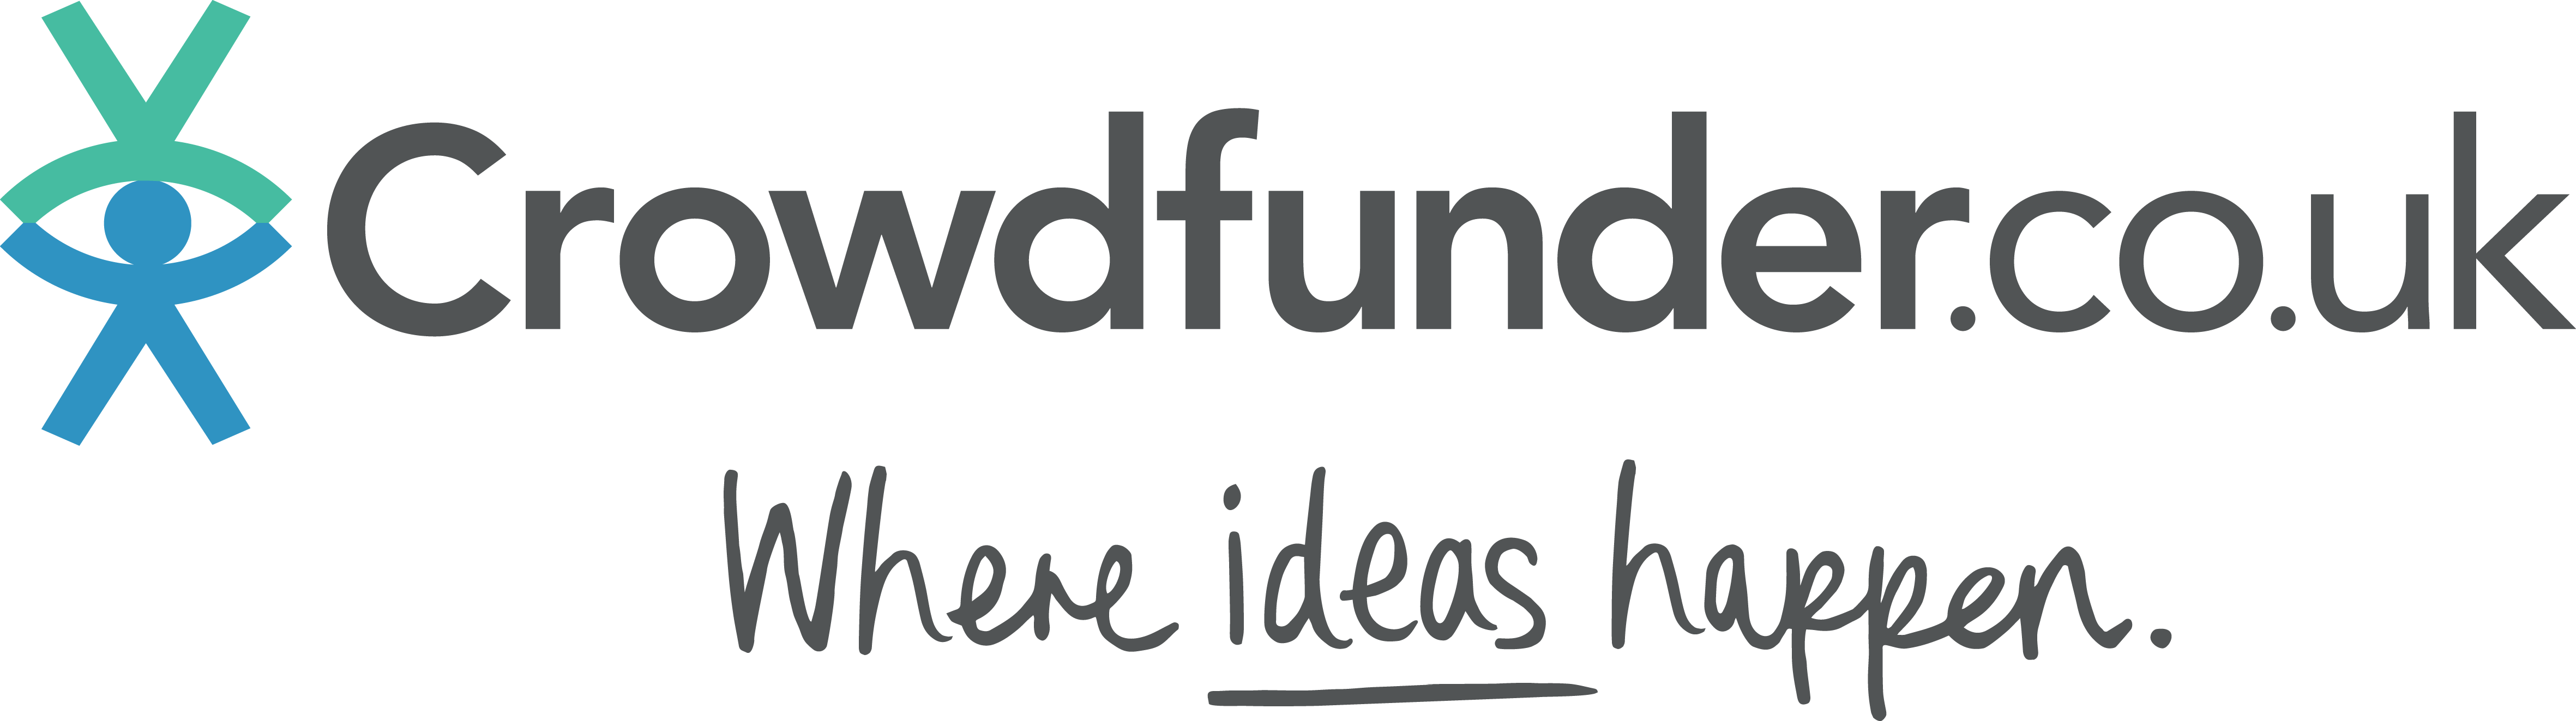 How to Set Up Your Campaign with Crowdfunder.co.uk - Twine Blog